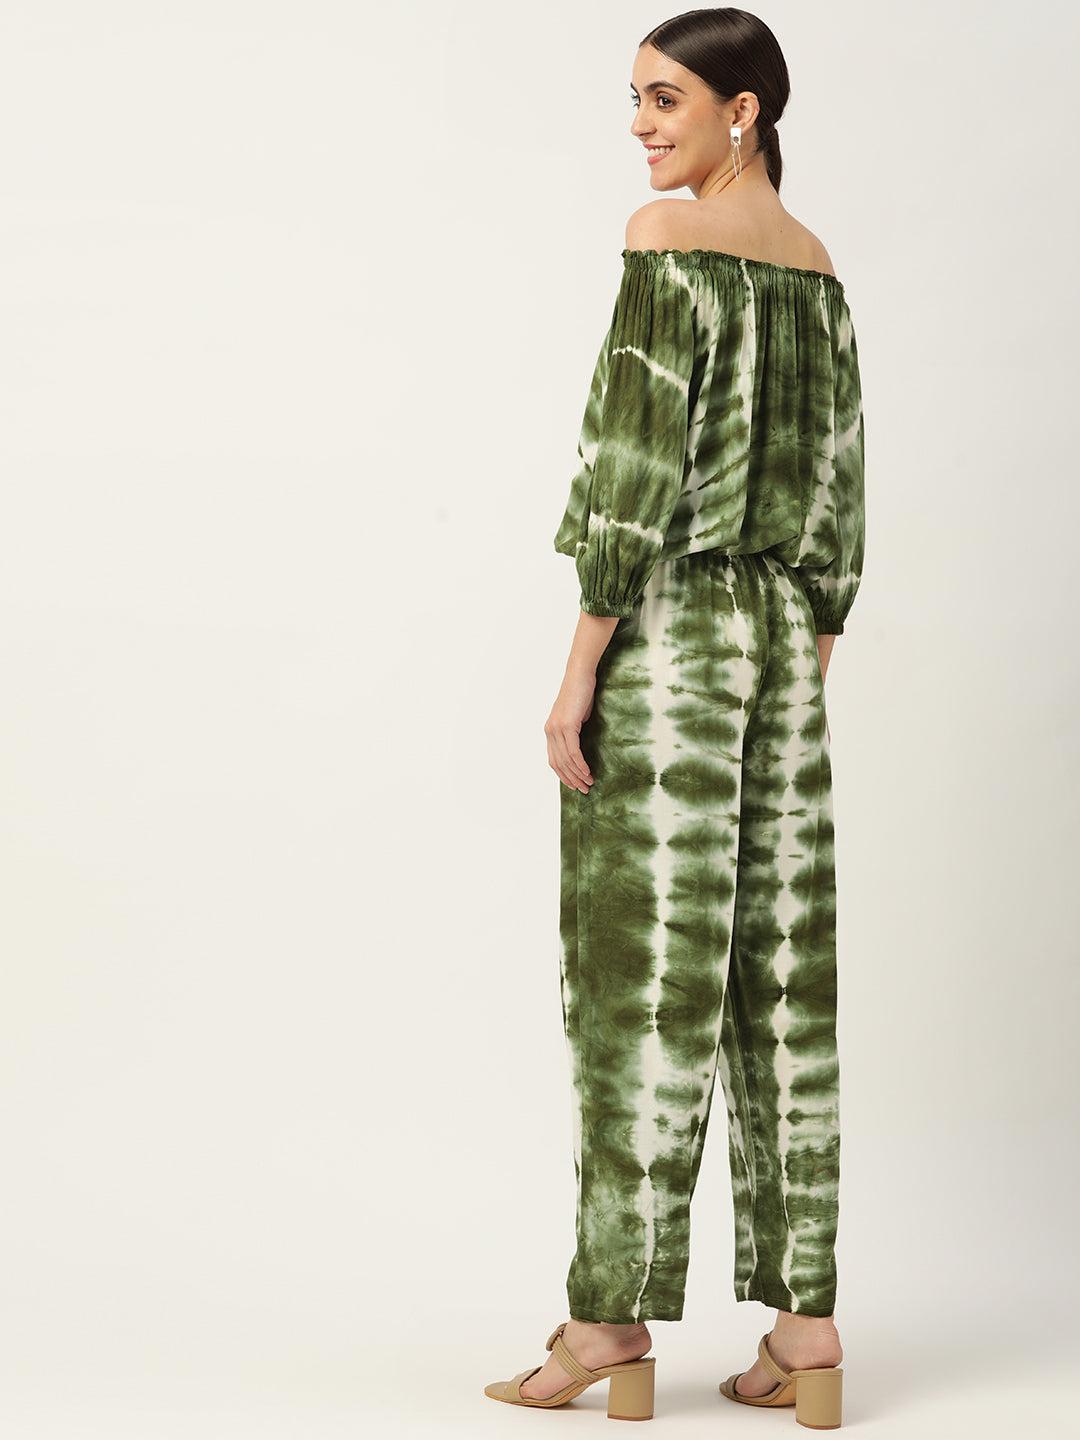 Olive Green White Rayon Tie Dye Co-Ords